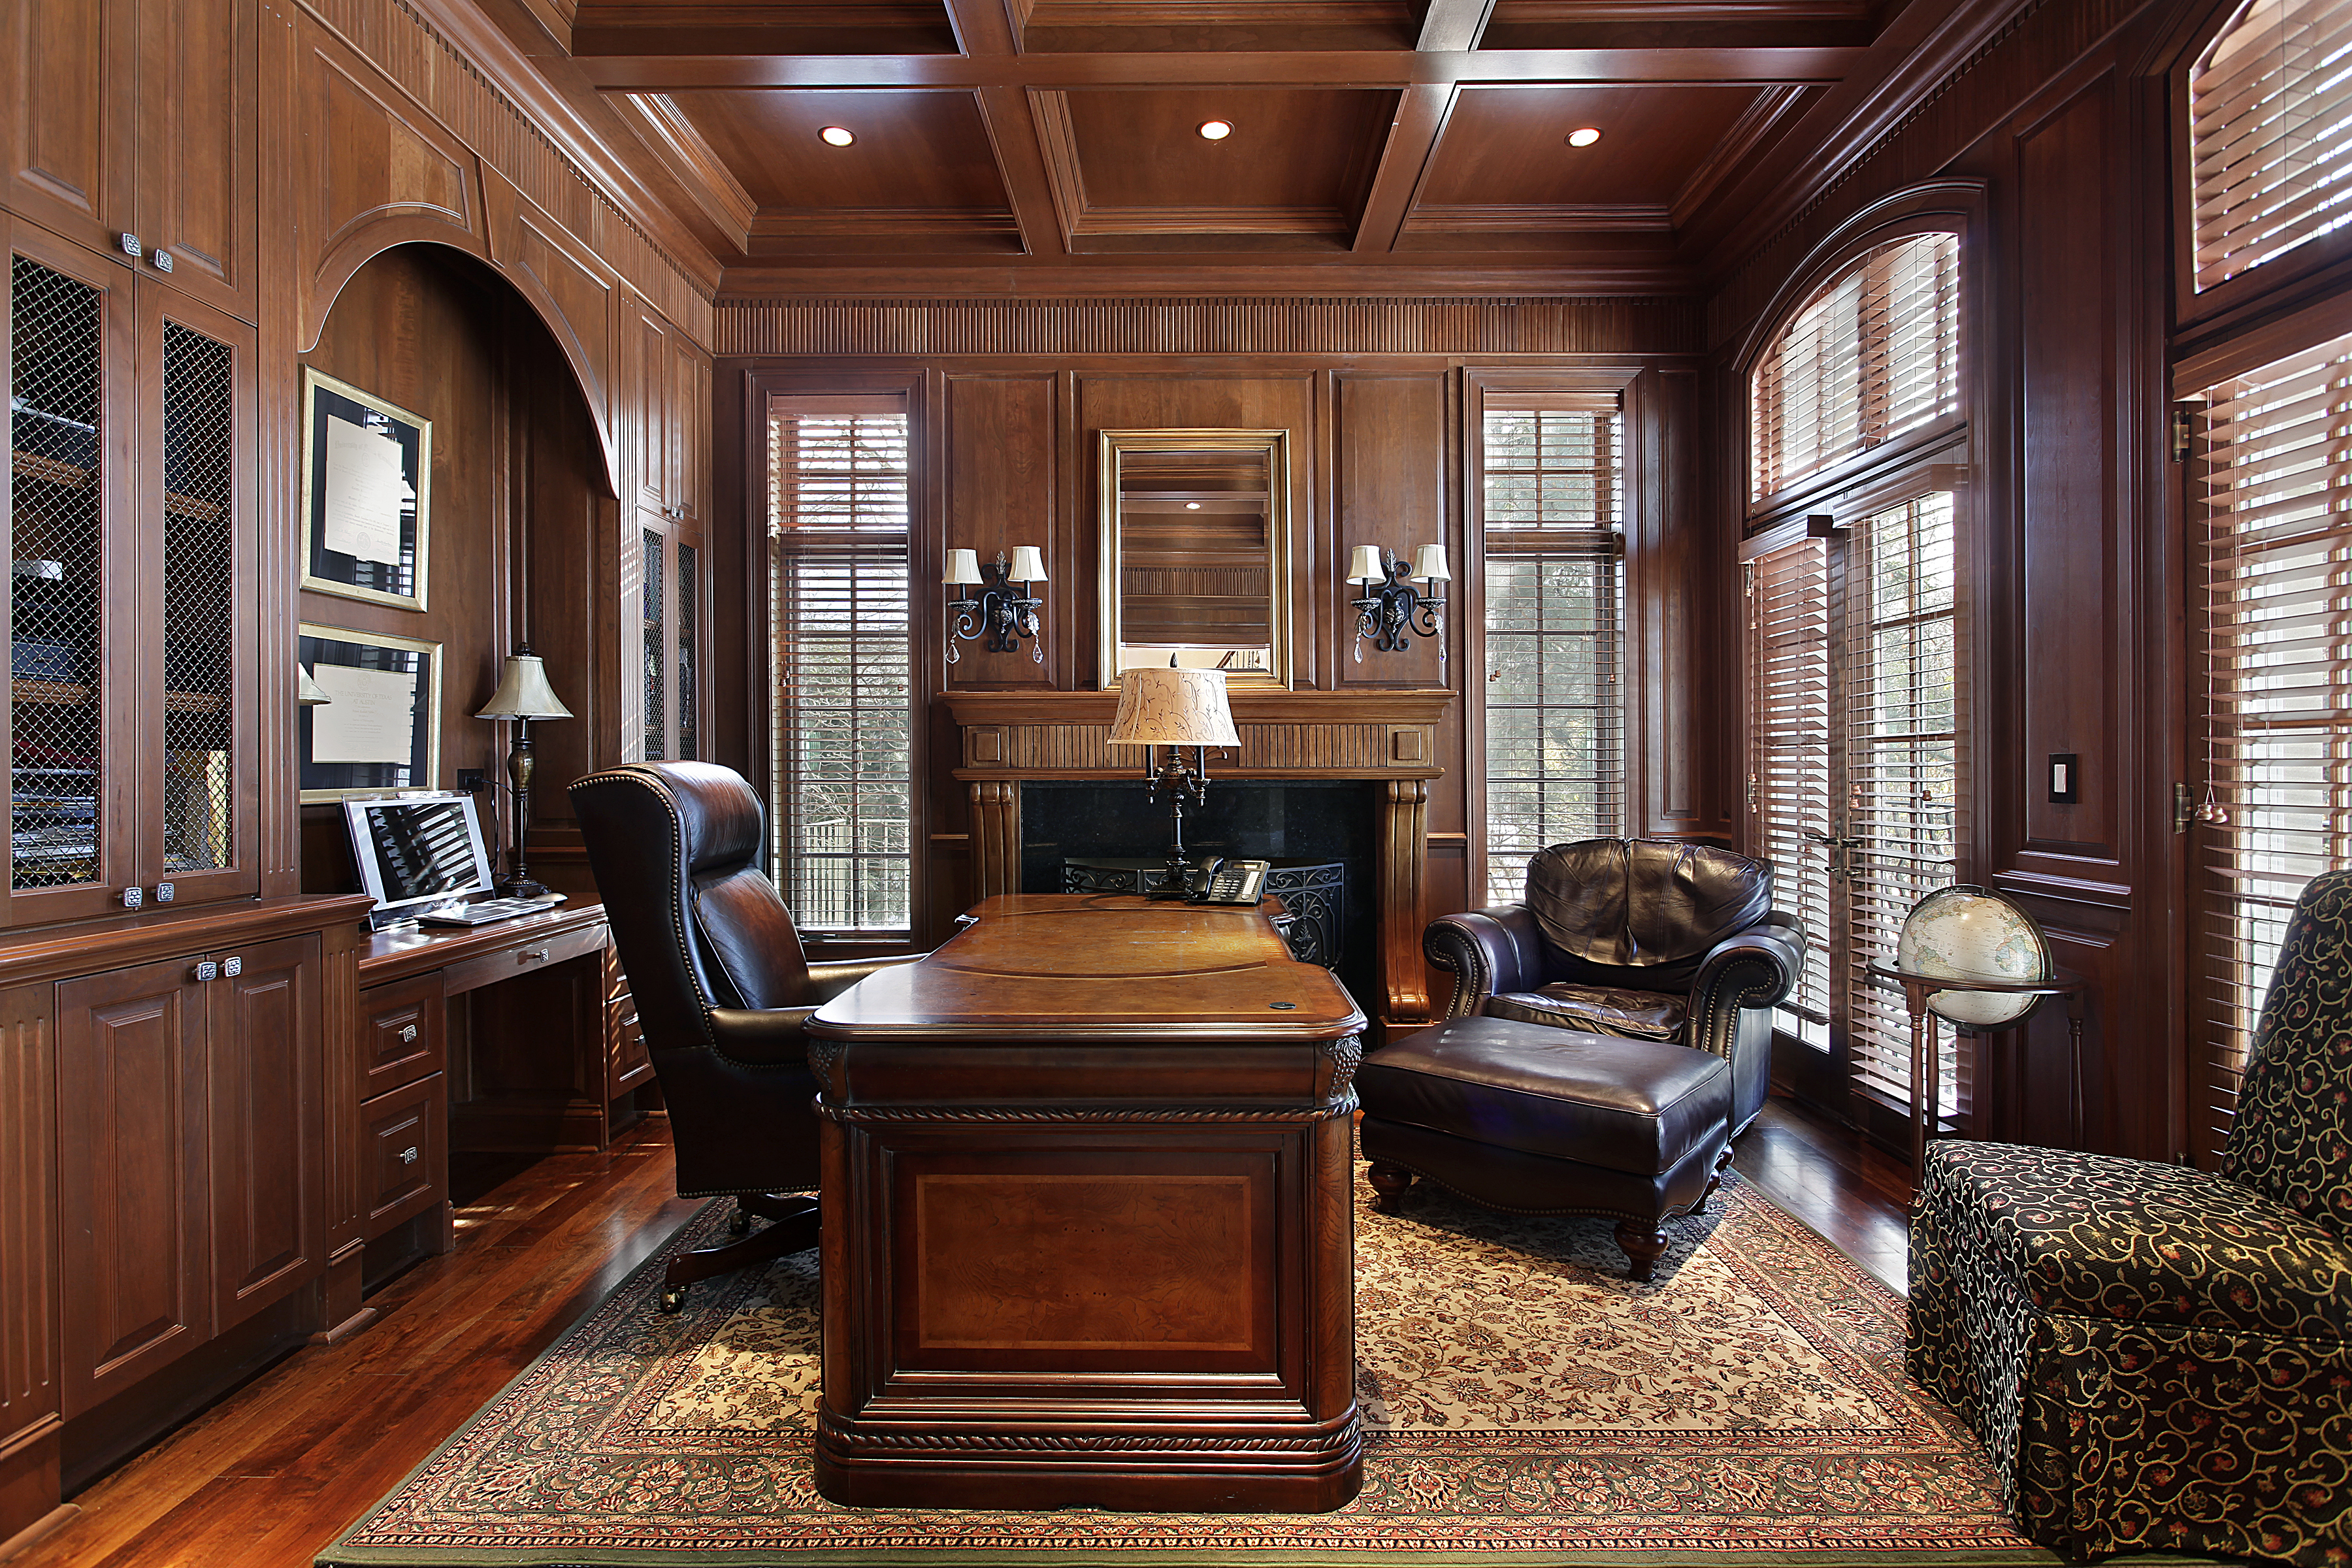 Rich office at home | Source: Shutterstock.com